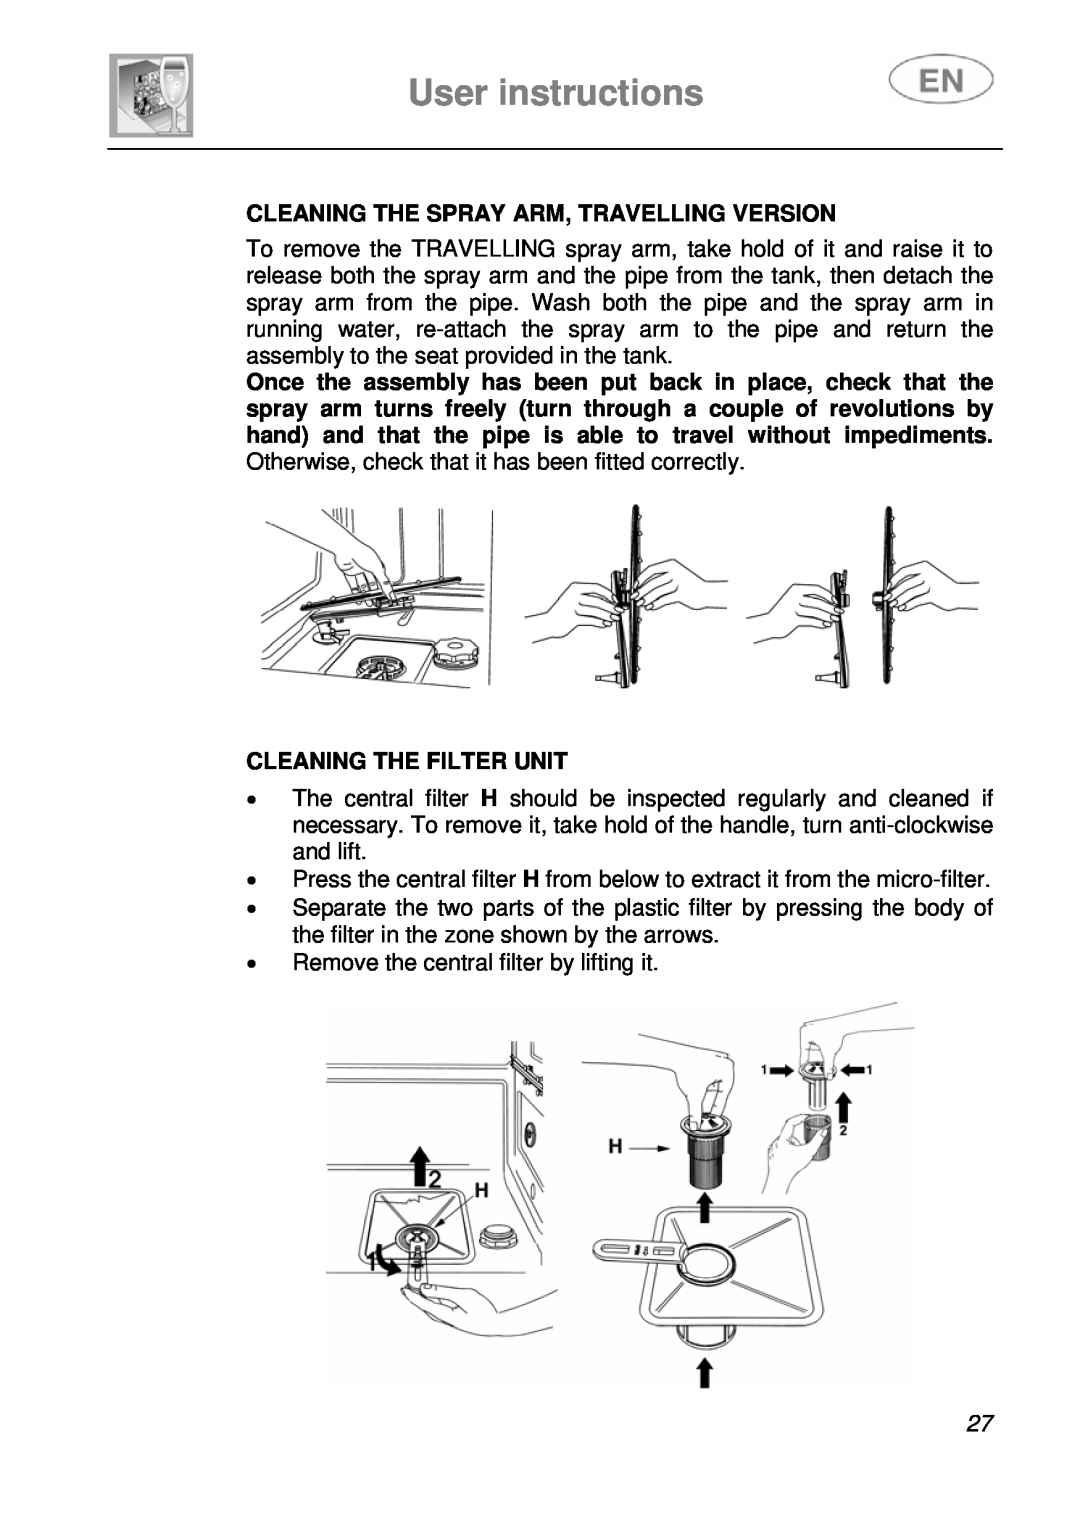 Smeg DF410BL1 instruction manual Cleaning The Spray Arm, Travelling Version, Cleaning The Filter Unit, User instructions 